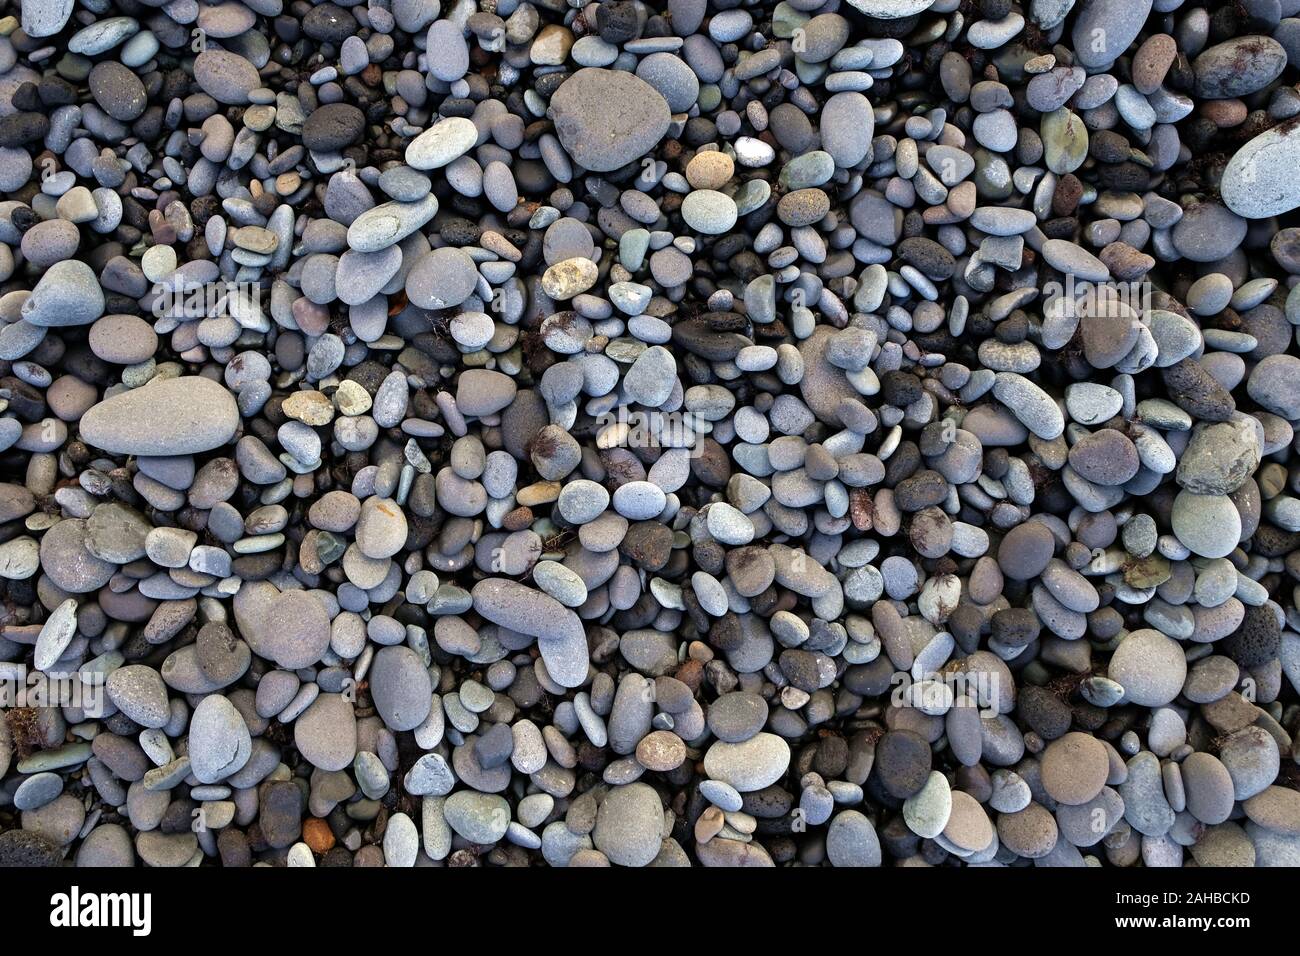 Wet and dry round stones, pebbles on the beach, collection of minerals, ocean shore. Stock Photo